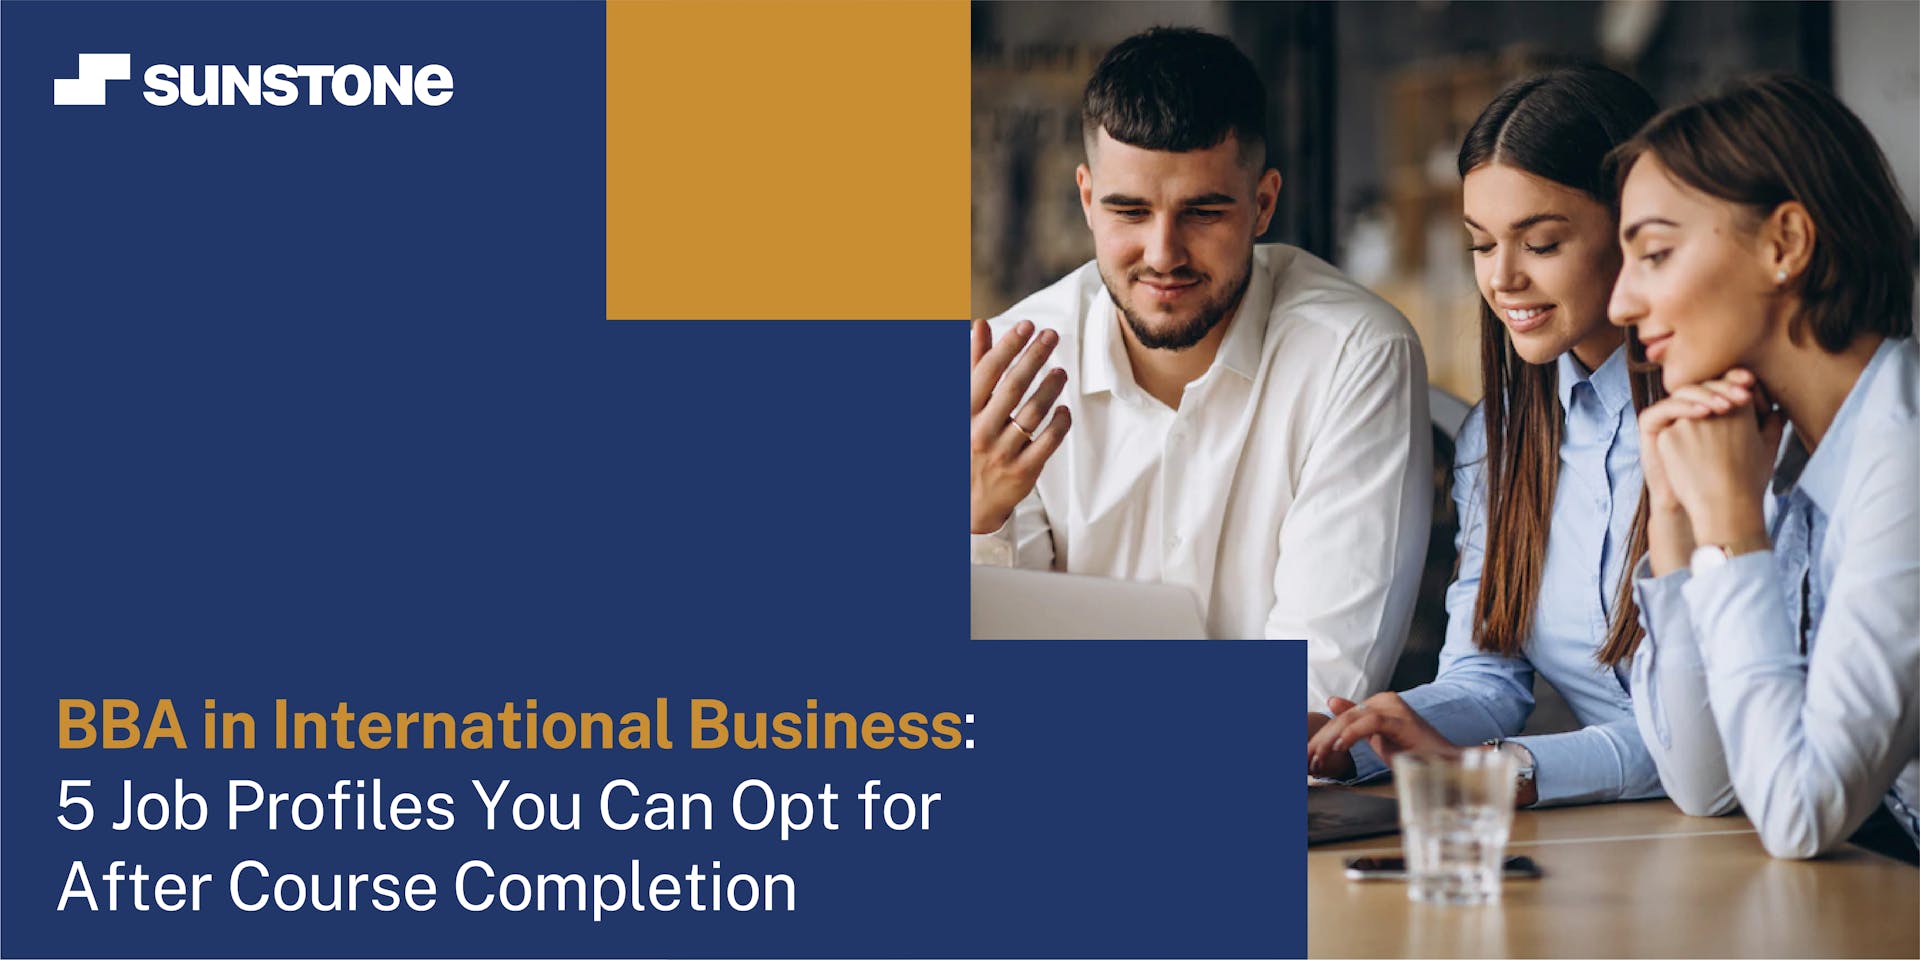 BBA in International Business: 5 Job Profiles You Can Opt for After Course Completion